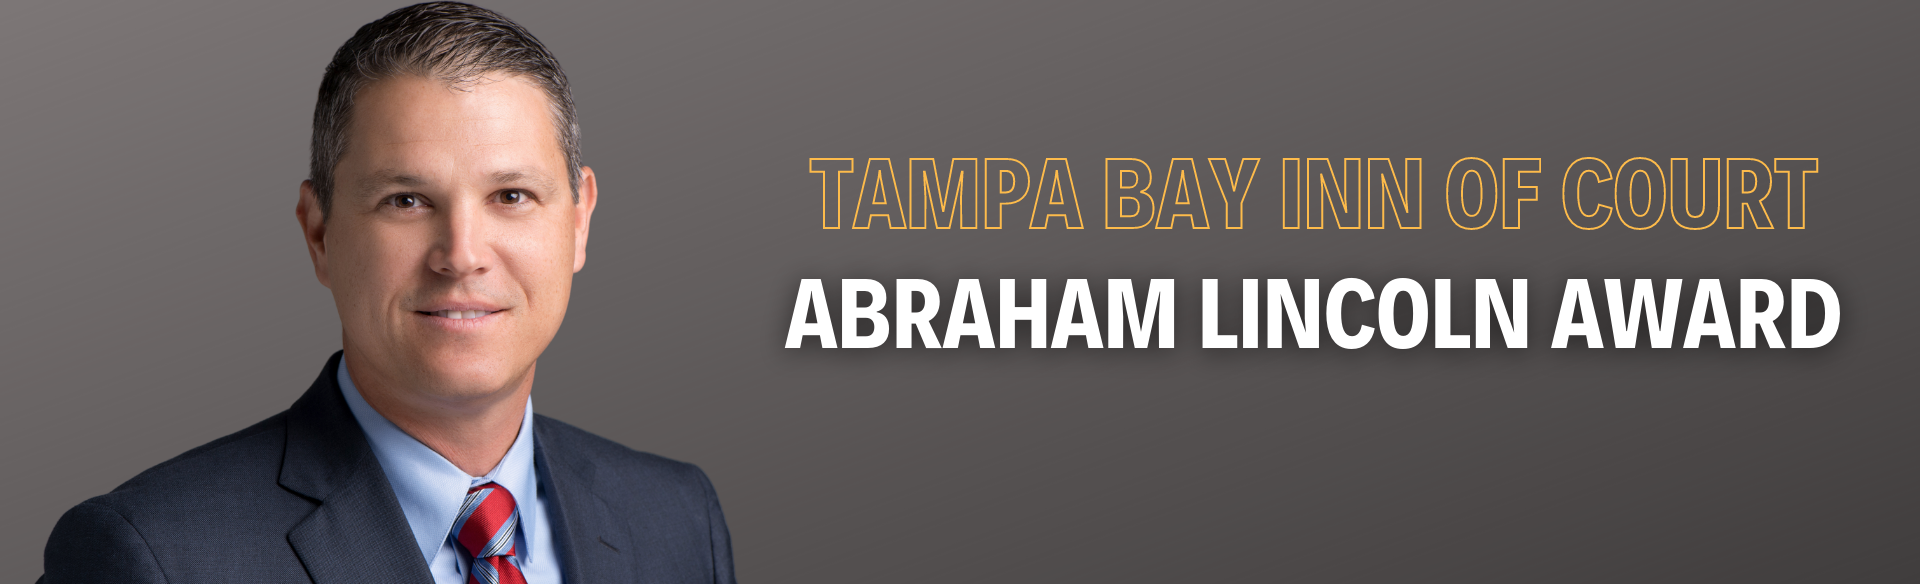 Brian Oblow is Recognized by the Tampa Bay American Inn of Court with the Abraham Lincoln Award featured image